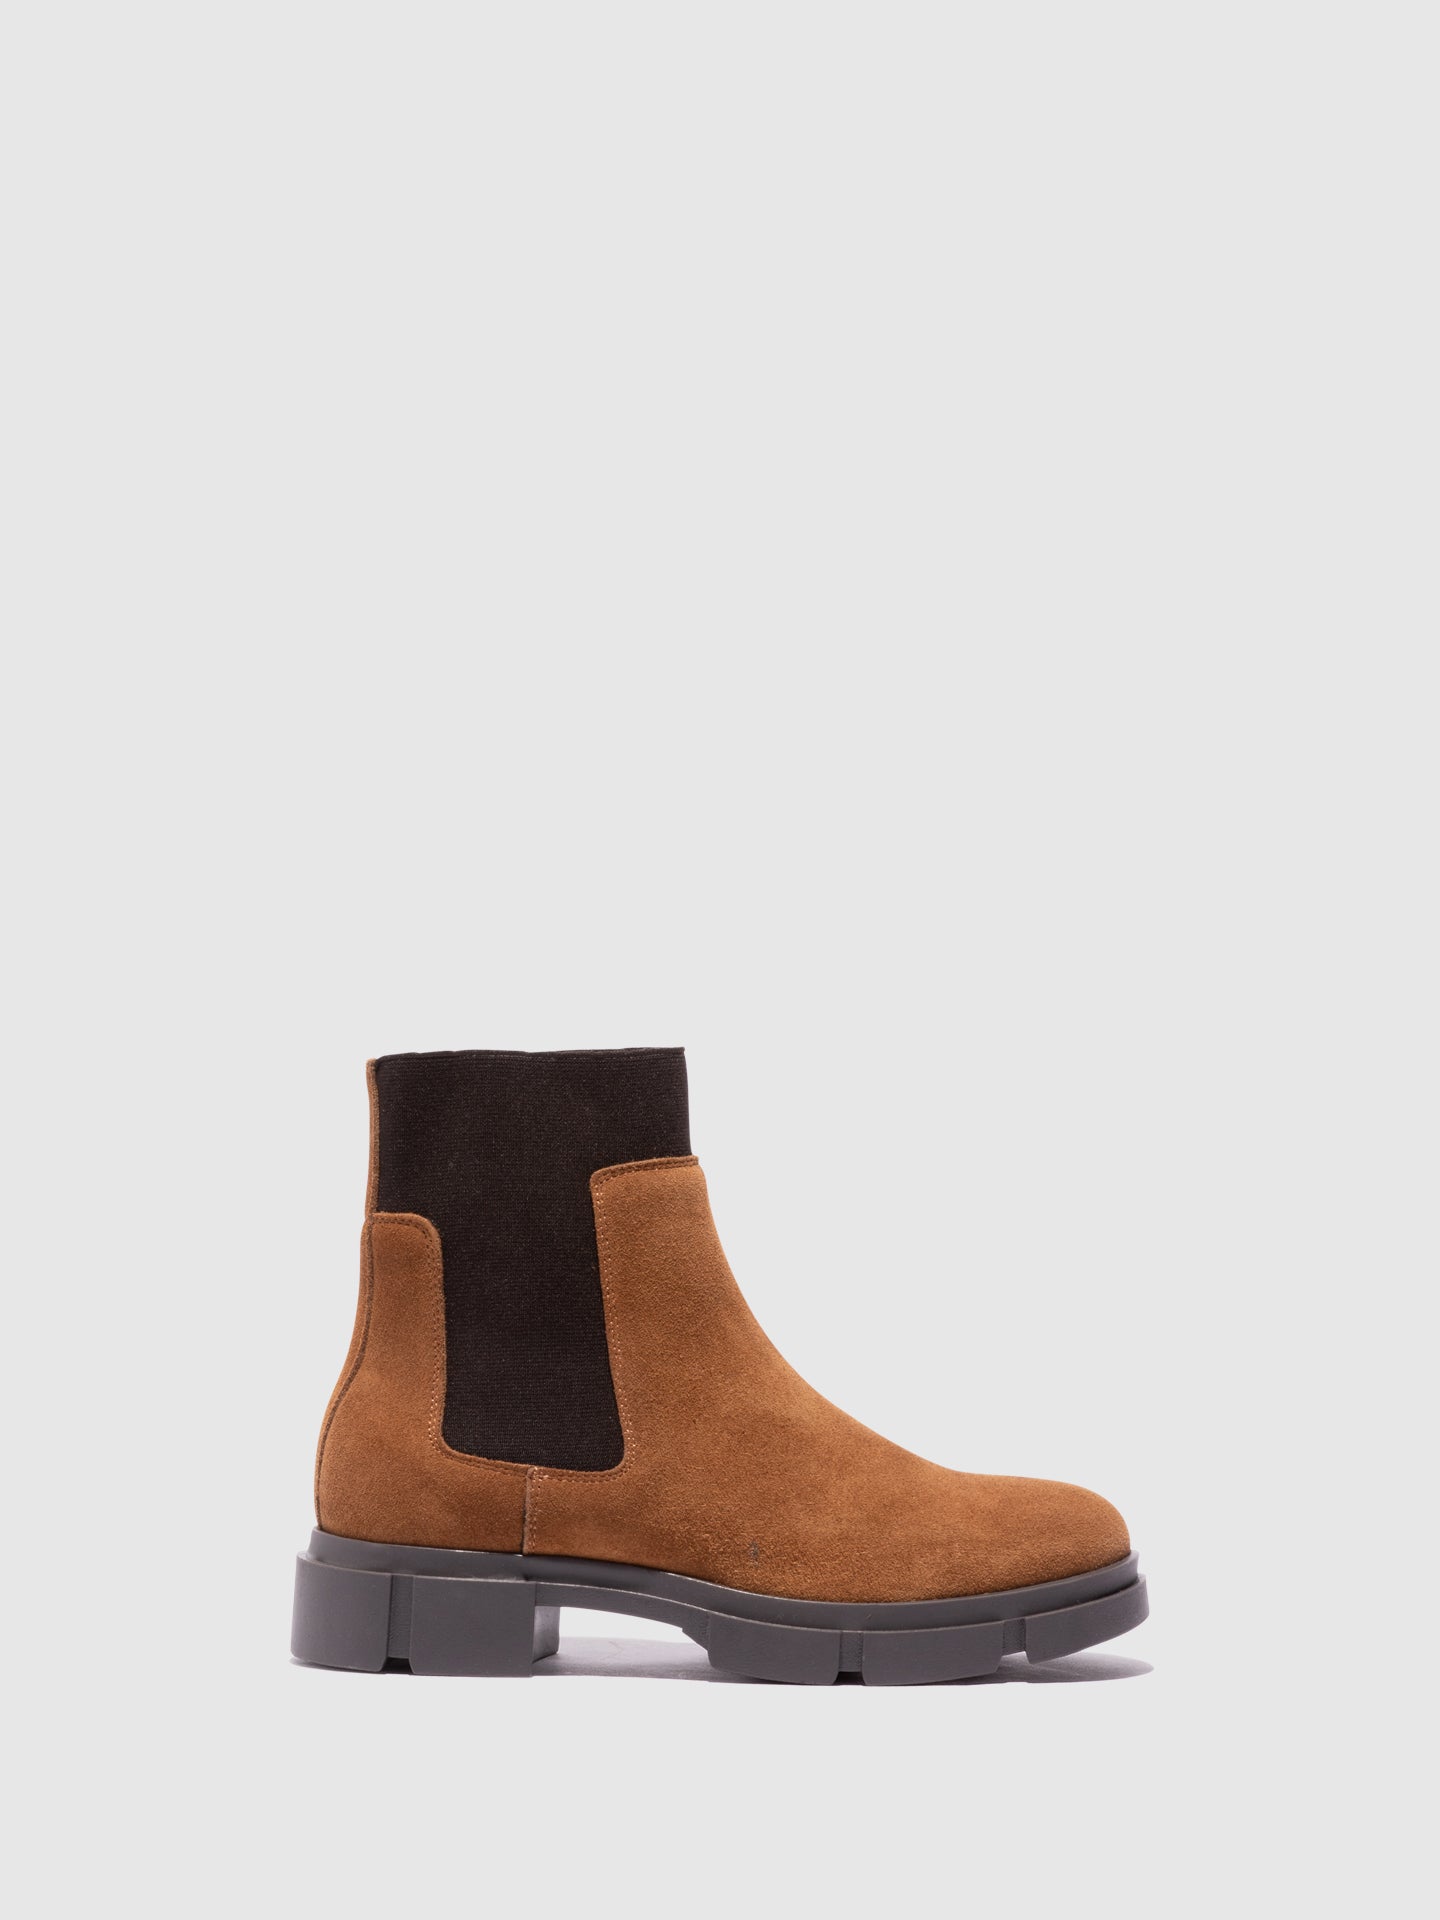 Fungi Camel Chelsea Ankle Boots